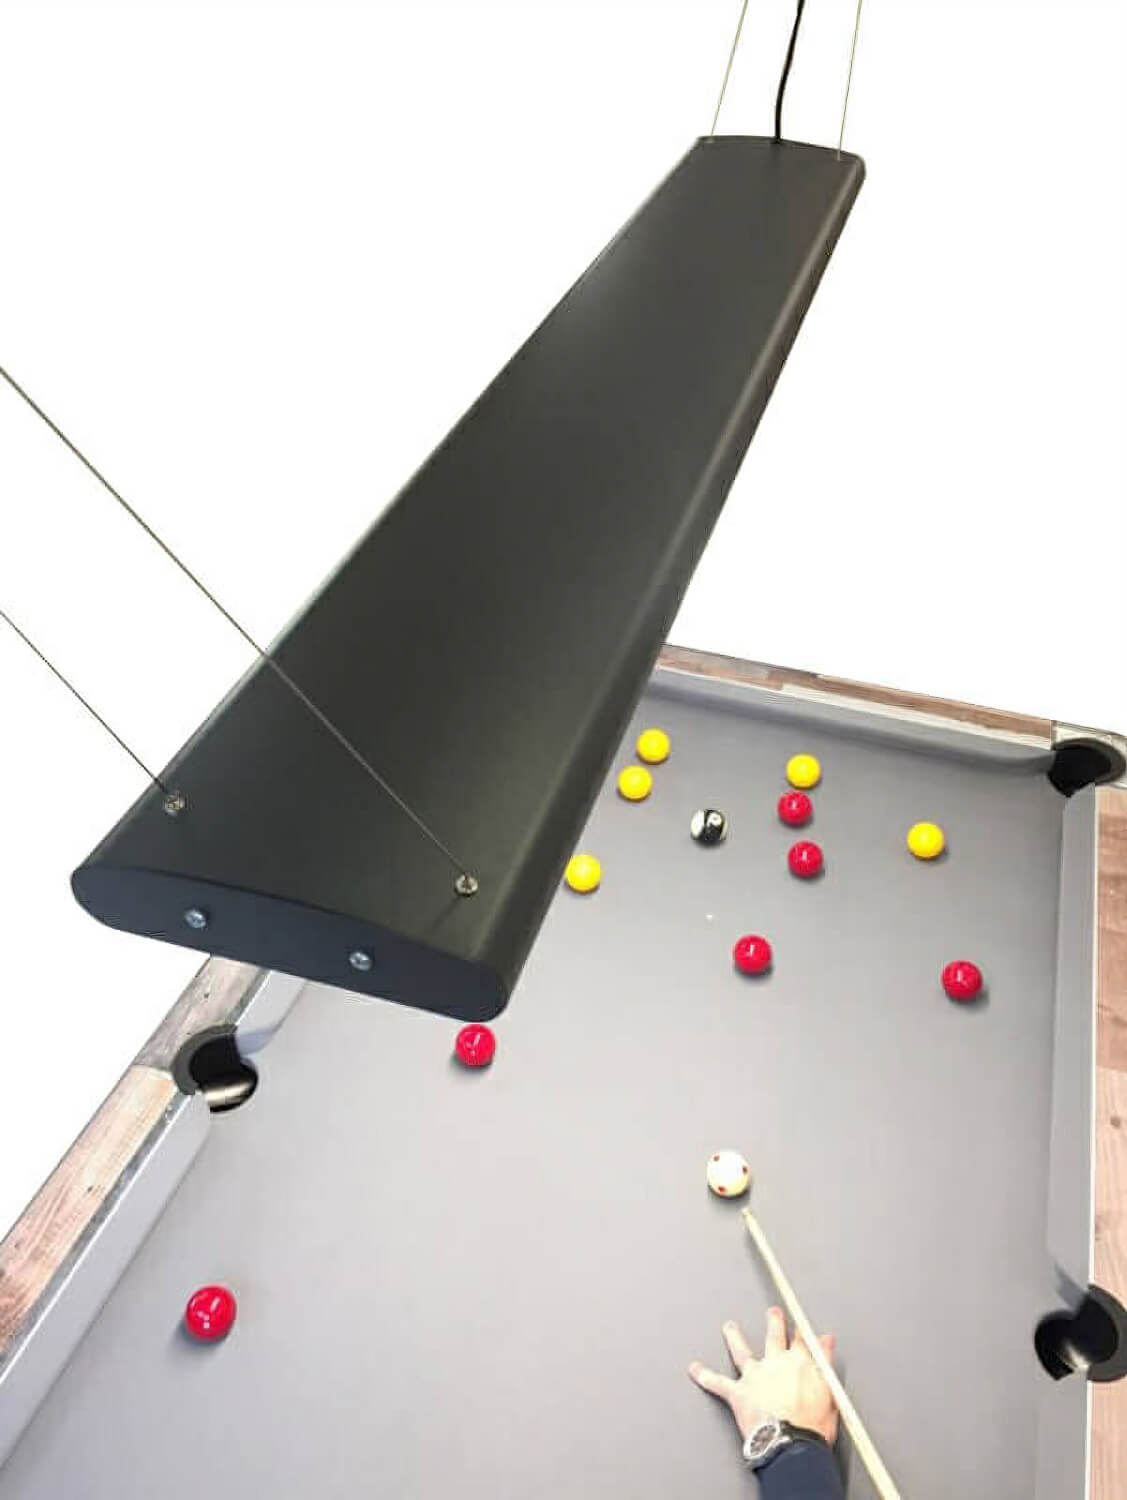 Supreme Led Pool Snooker Table Light, How Far Should A Pool Table Light Be From The